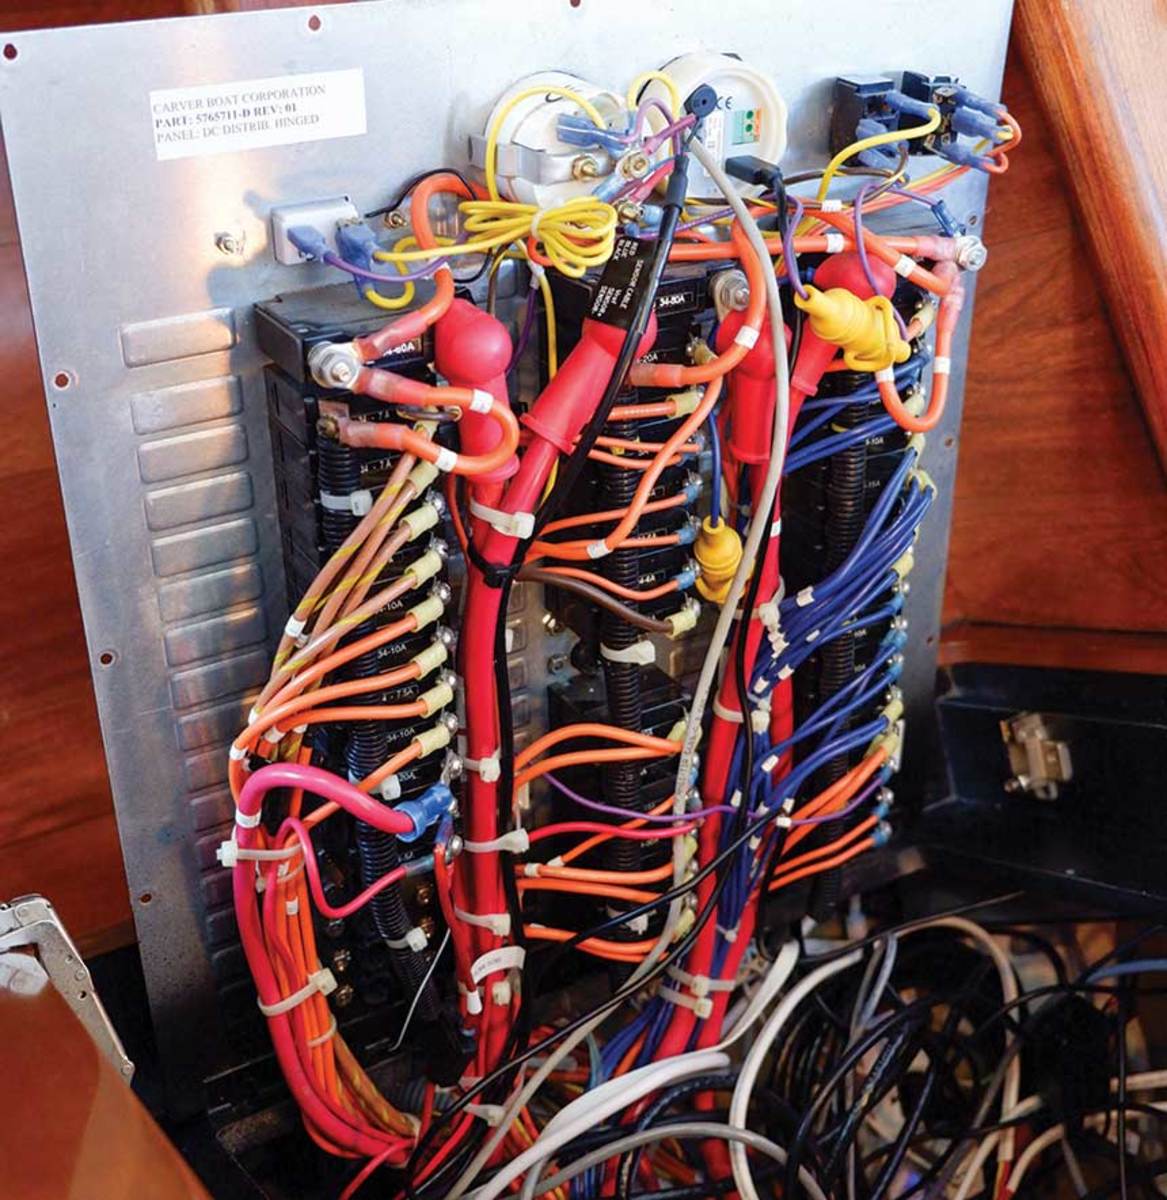 By converting to digital switching, you can save many pounds of wire.